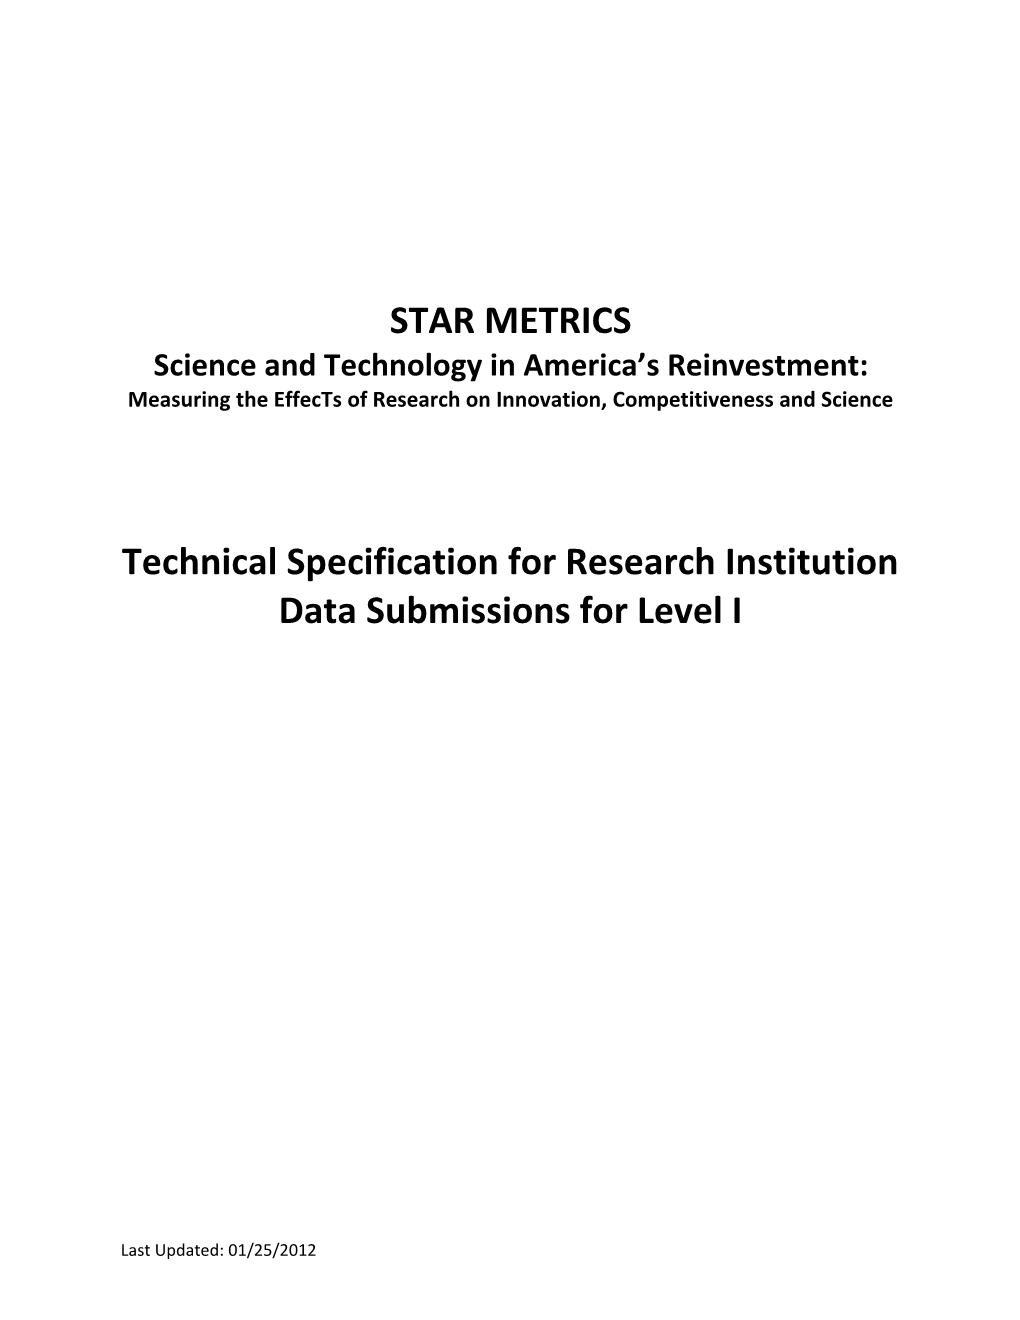 Technical Specification for Research Institution Data Submissions for Level I